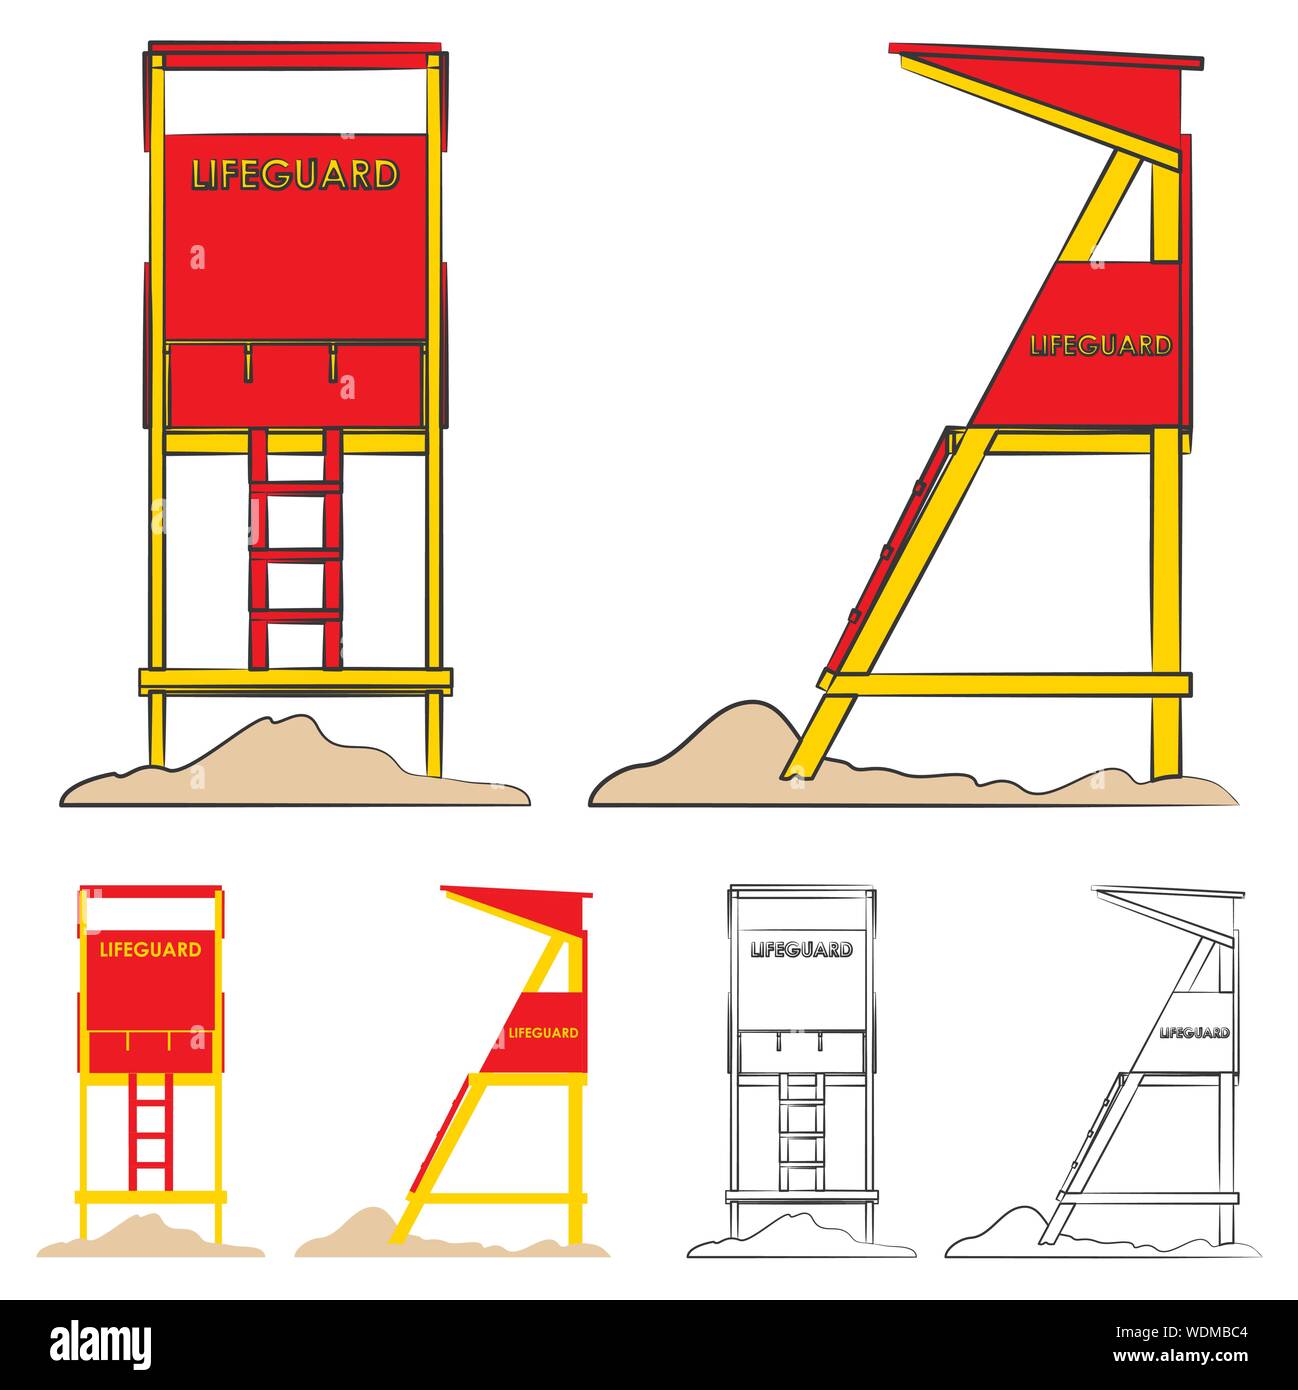 Traditional Life guard tower colored Stock Vector